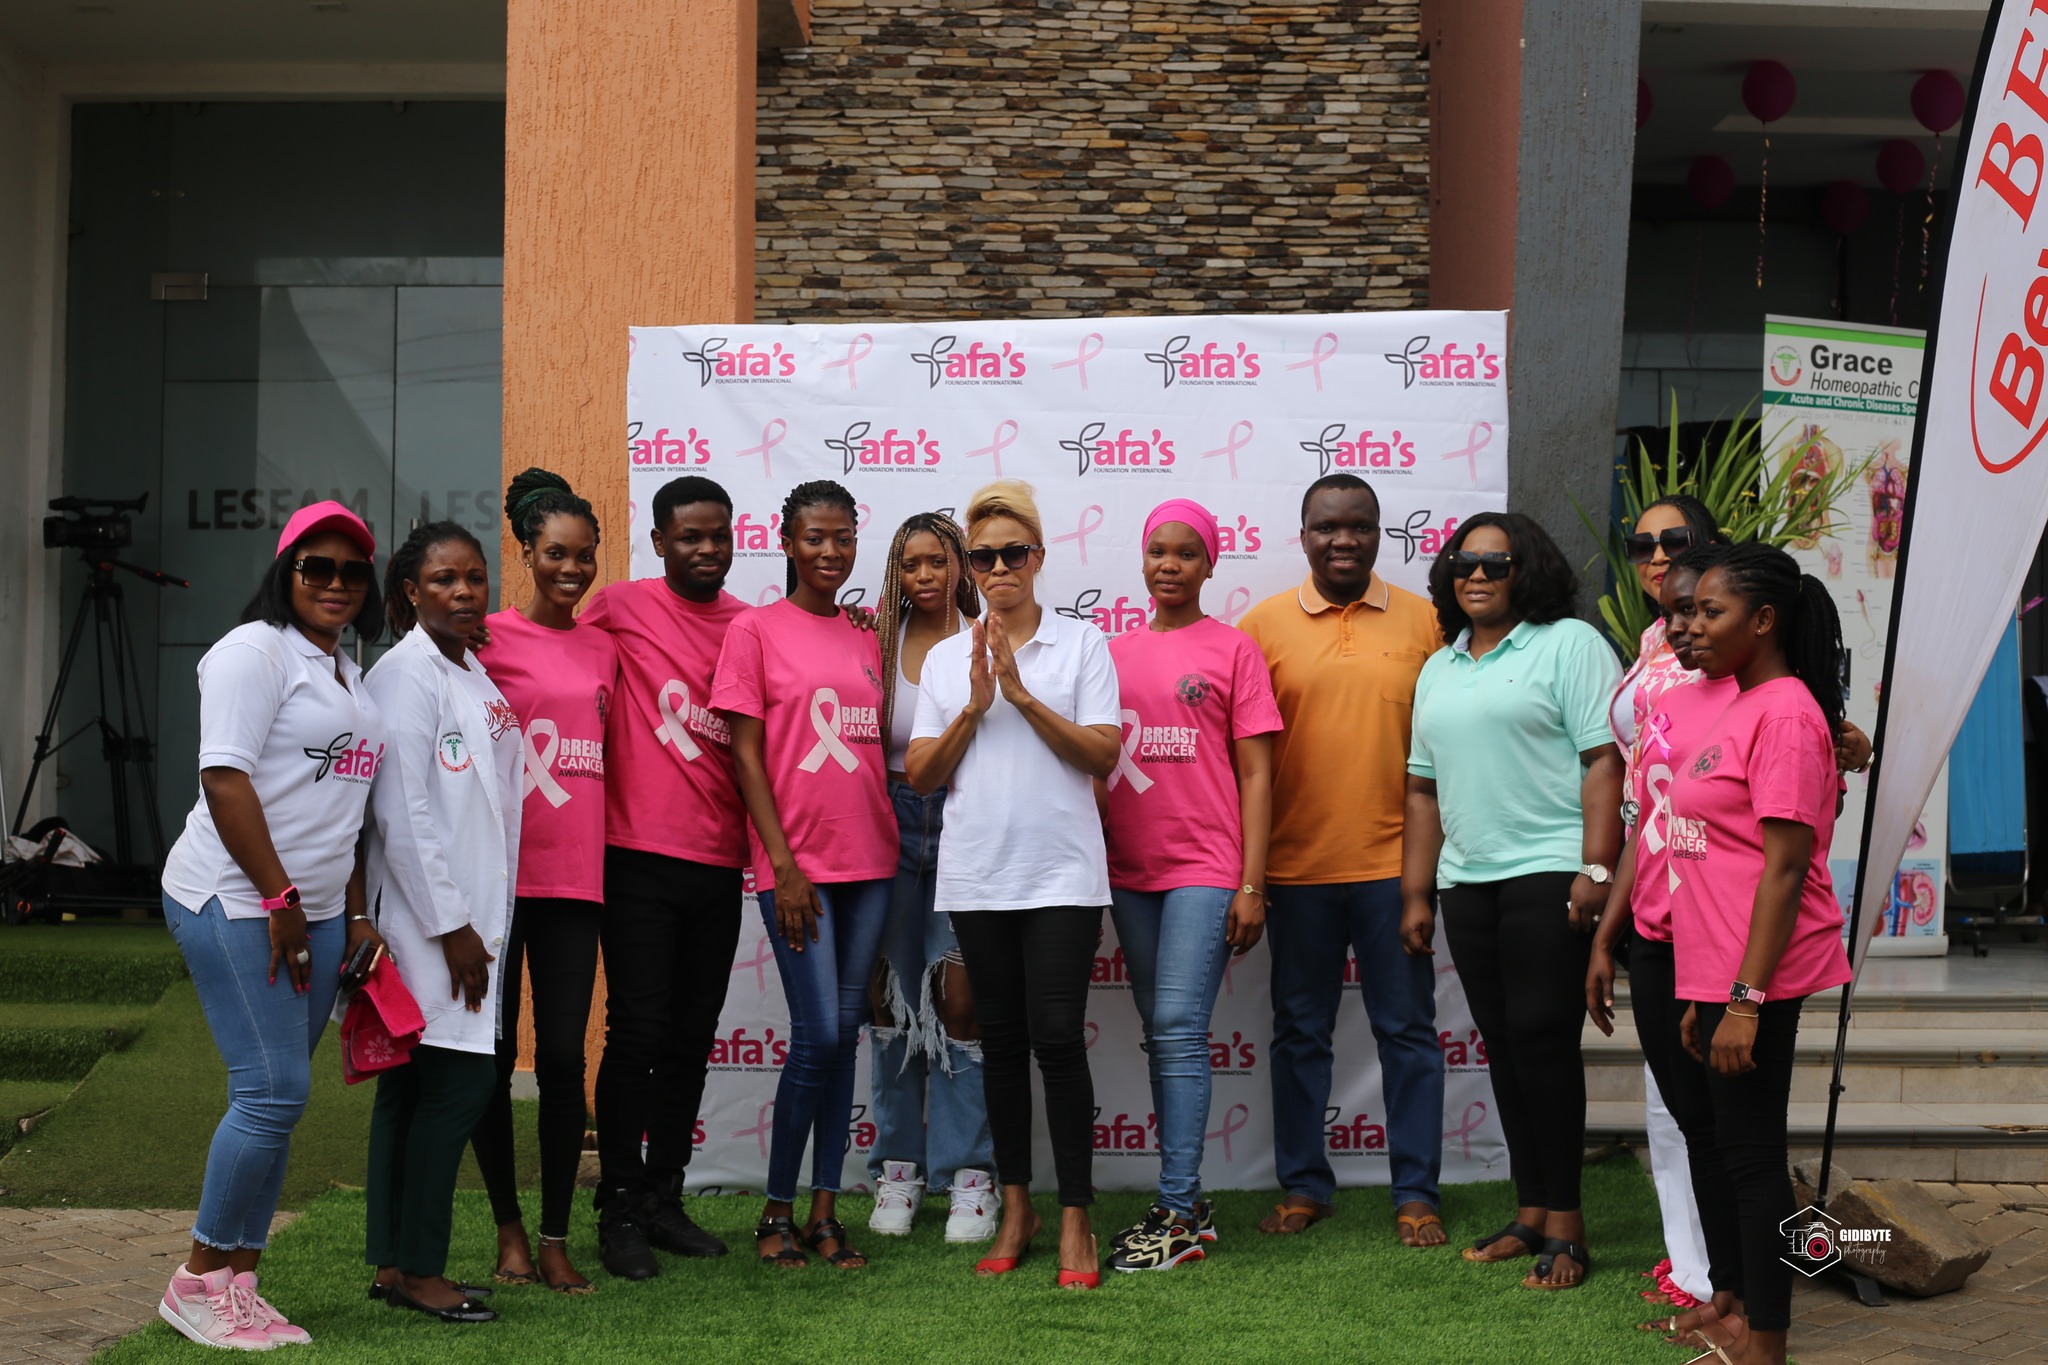 SOUTH AFRICAN HIGH COMMISSIONER TO GHANA H.E GRACE JEANET MASON SUPPORTS LESFAM FREE BREAST CANCER & HEALTH SCREENING.